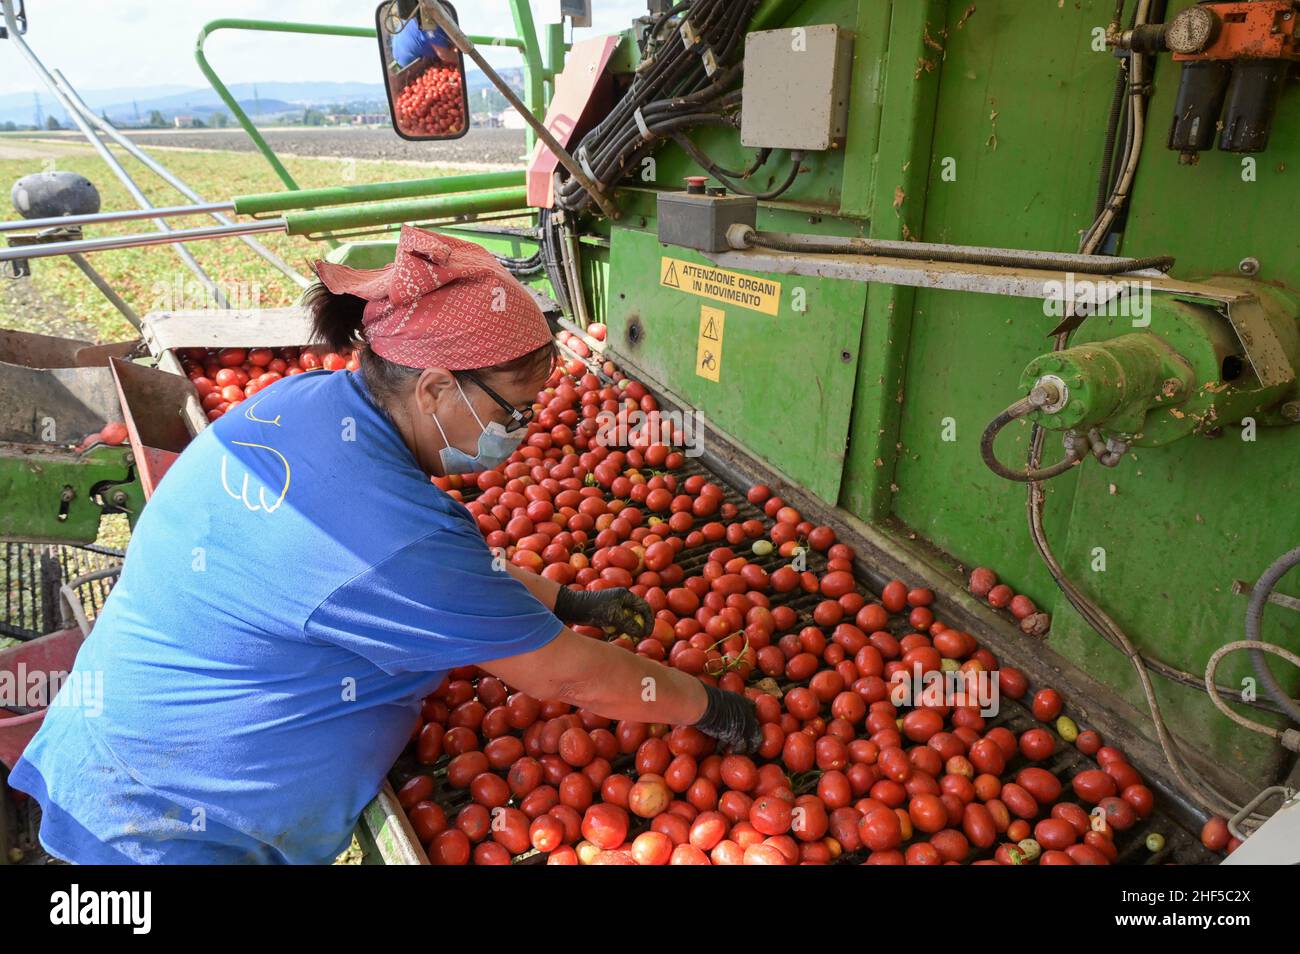 ITALY, Parma, Basilicanova, tomato contract farming for company Mutti s.p.a., harvest with Guaresi harvester, the harvested plum tomatoes are used for canned tomato, pulpo, passata and tomato concentrate / ITALIEN, Tomaten Vertragsanbau fuer Firma Mutti spa, die geernteten Flaschentomaten werden anschliessend zu Dosentomaten, Passata und Tomatenmark verarbeitet und konserviert, alles 100 Prozent Italien, Aussortierung unreifer und beschädigter Tomaten Stock Photo